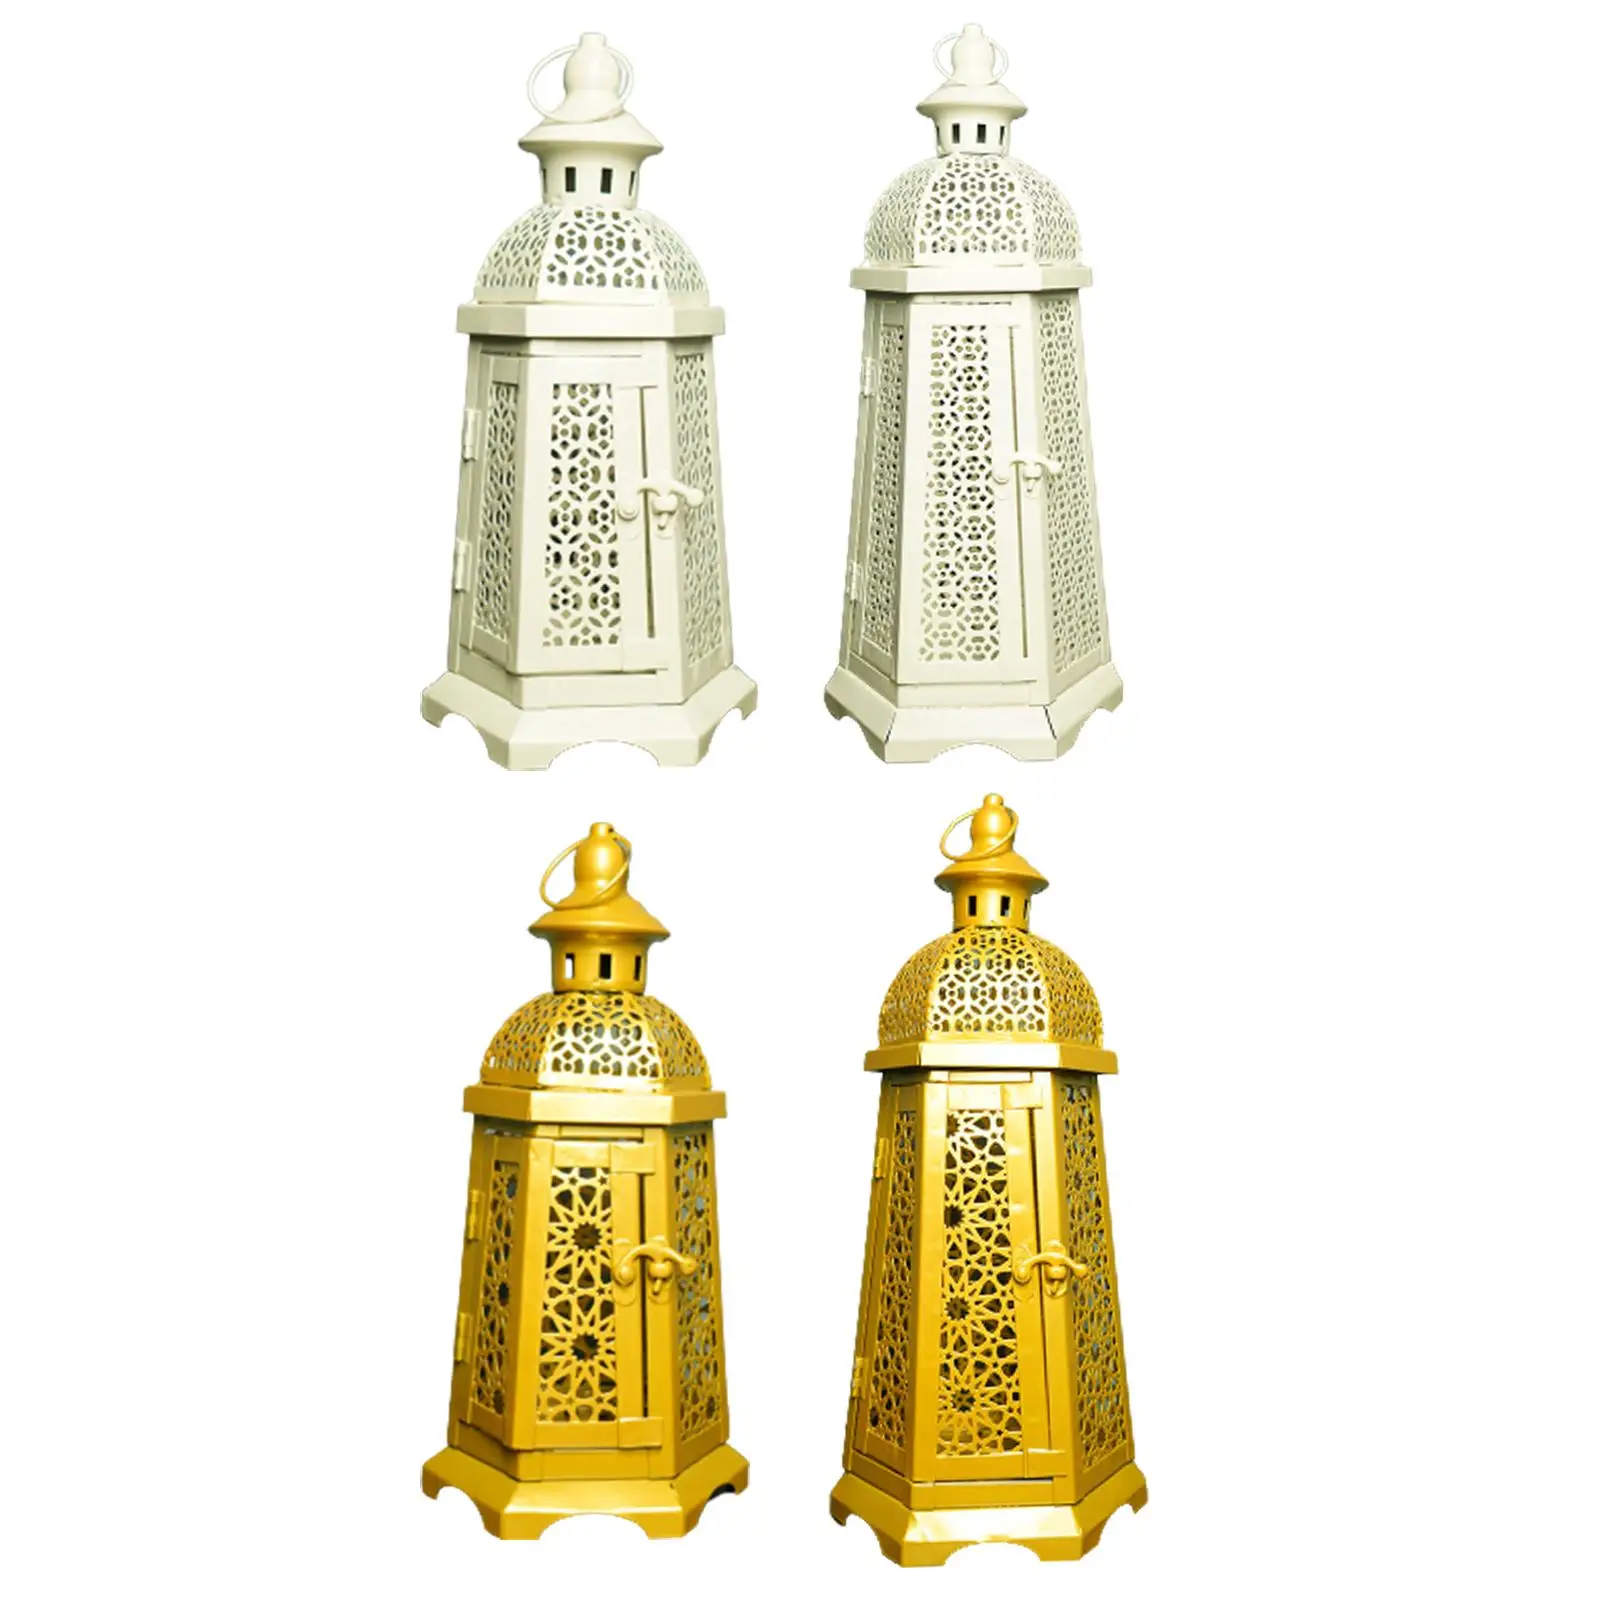 Candlestick Holders for Pillar Candles Table Centerpiece Wall Hanging Decorative Candle Lanterns for Wedding Kitchen Fireplace